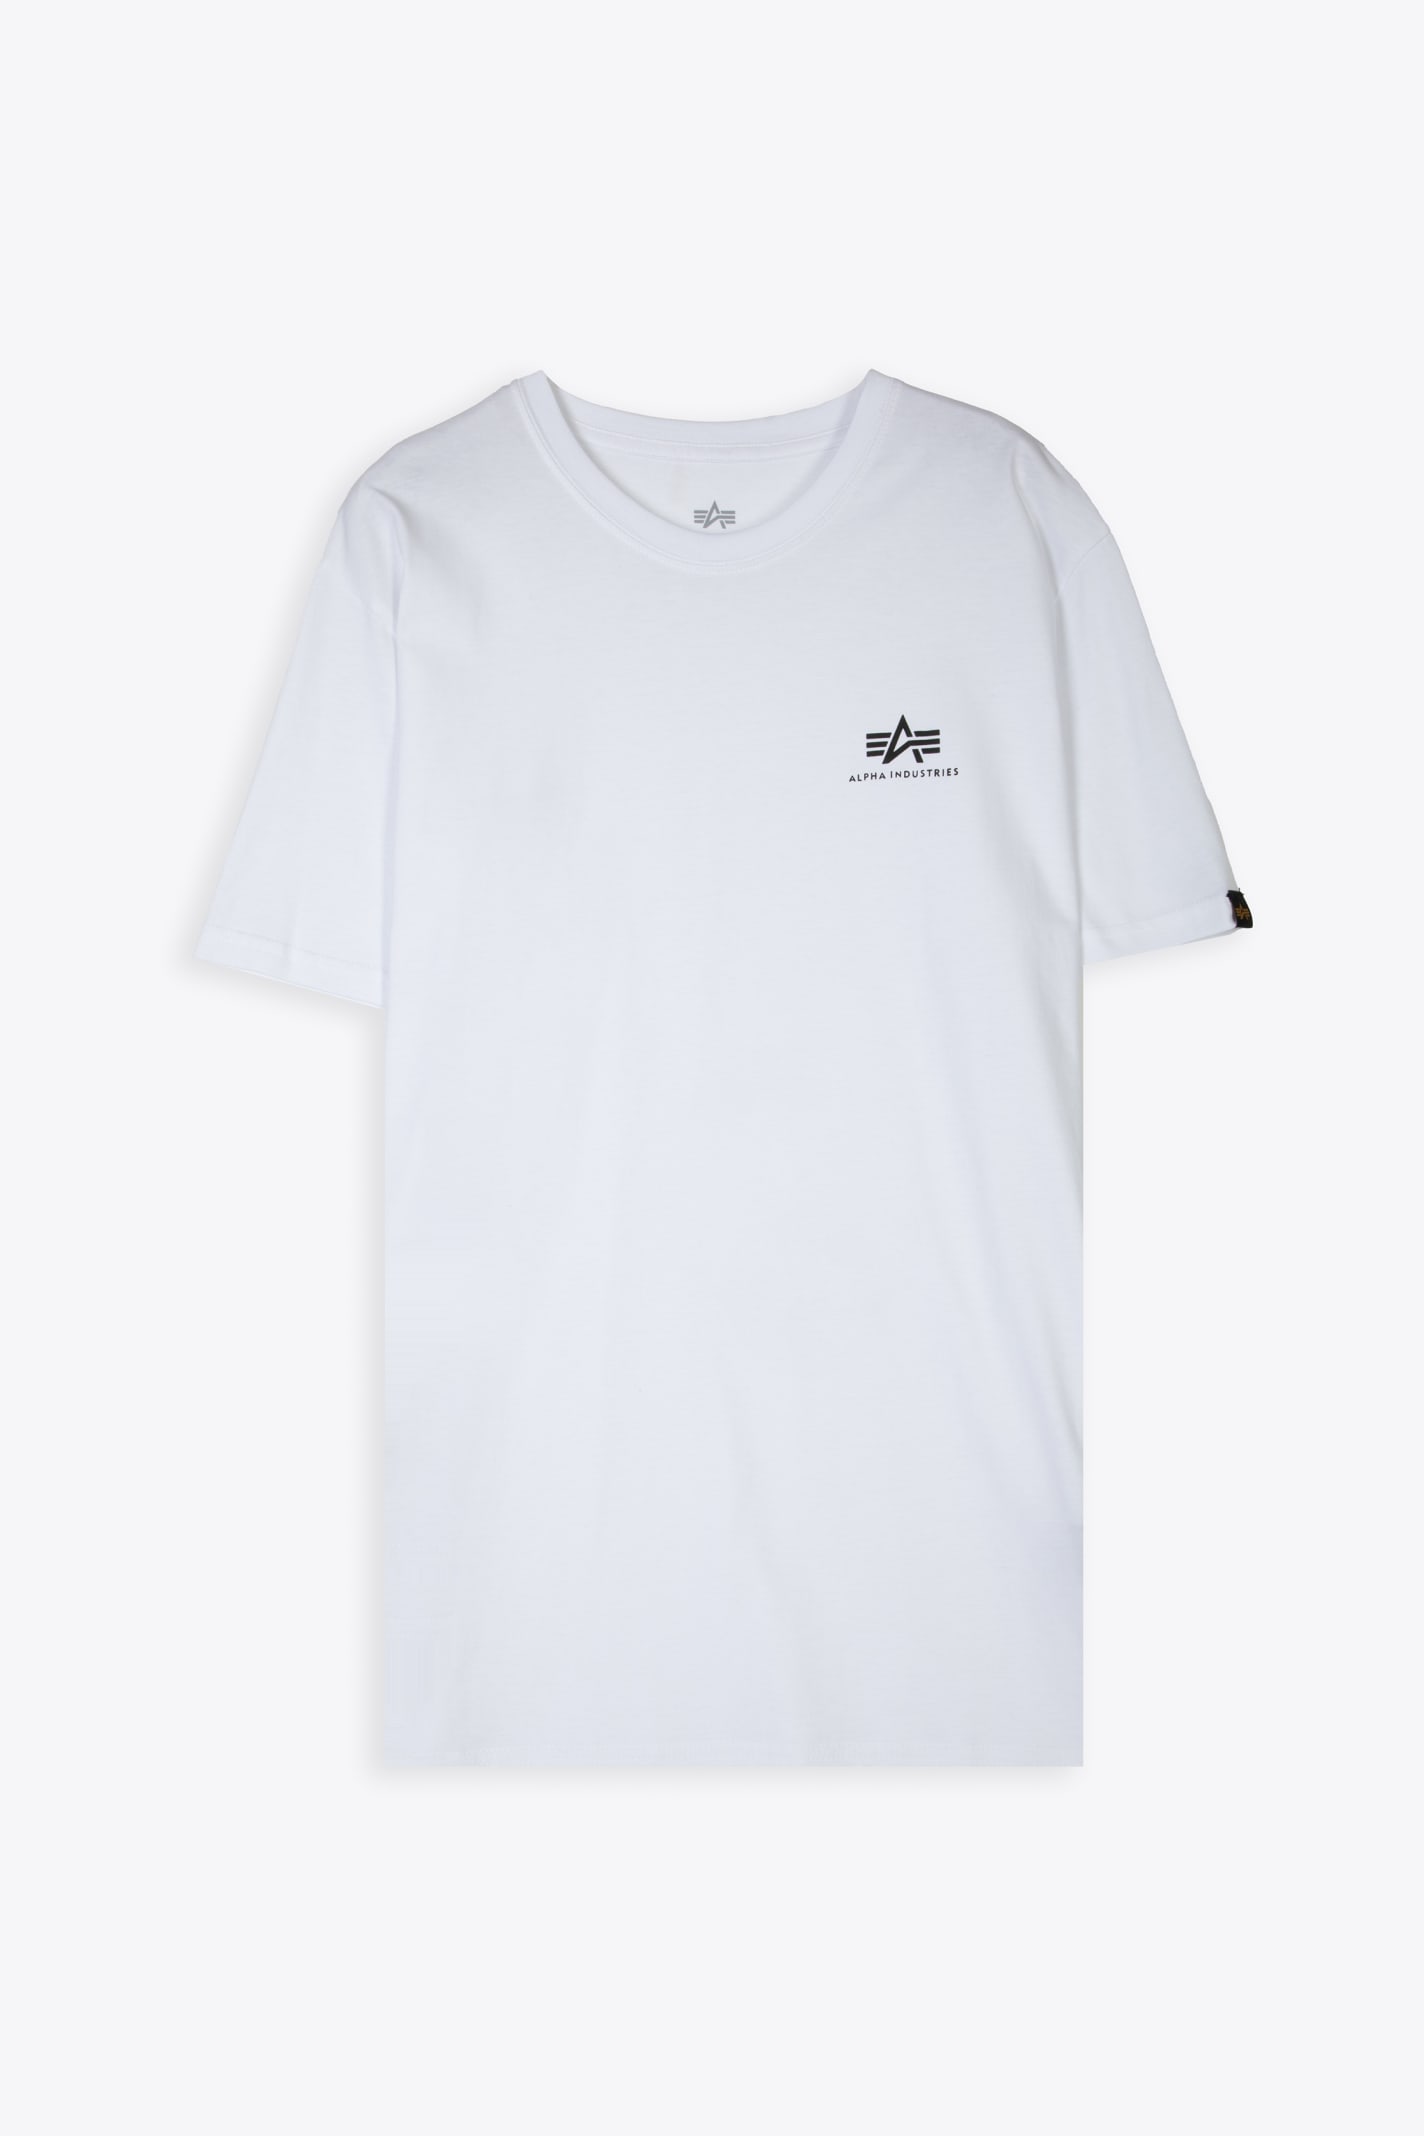 Alpha Industries Basic T Small Logo White cotton t-shirt with chest logo